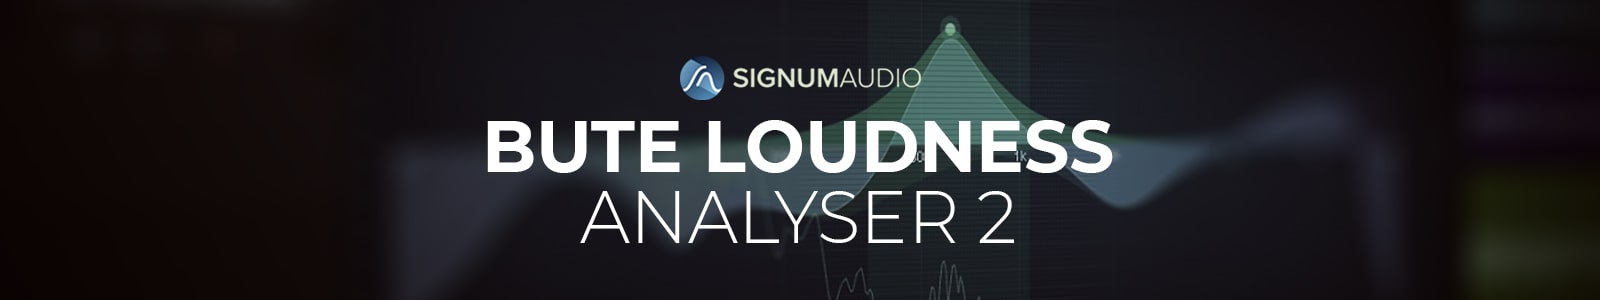 BUTE Loudness Analyser